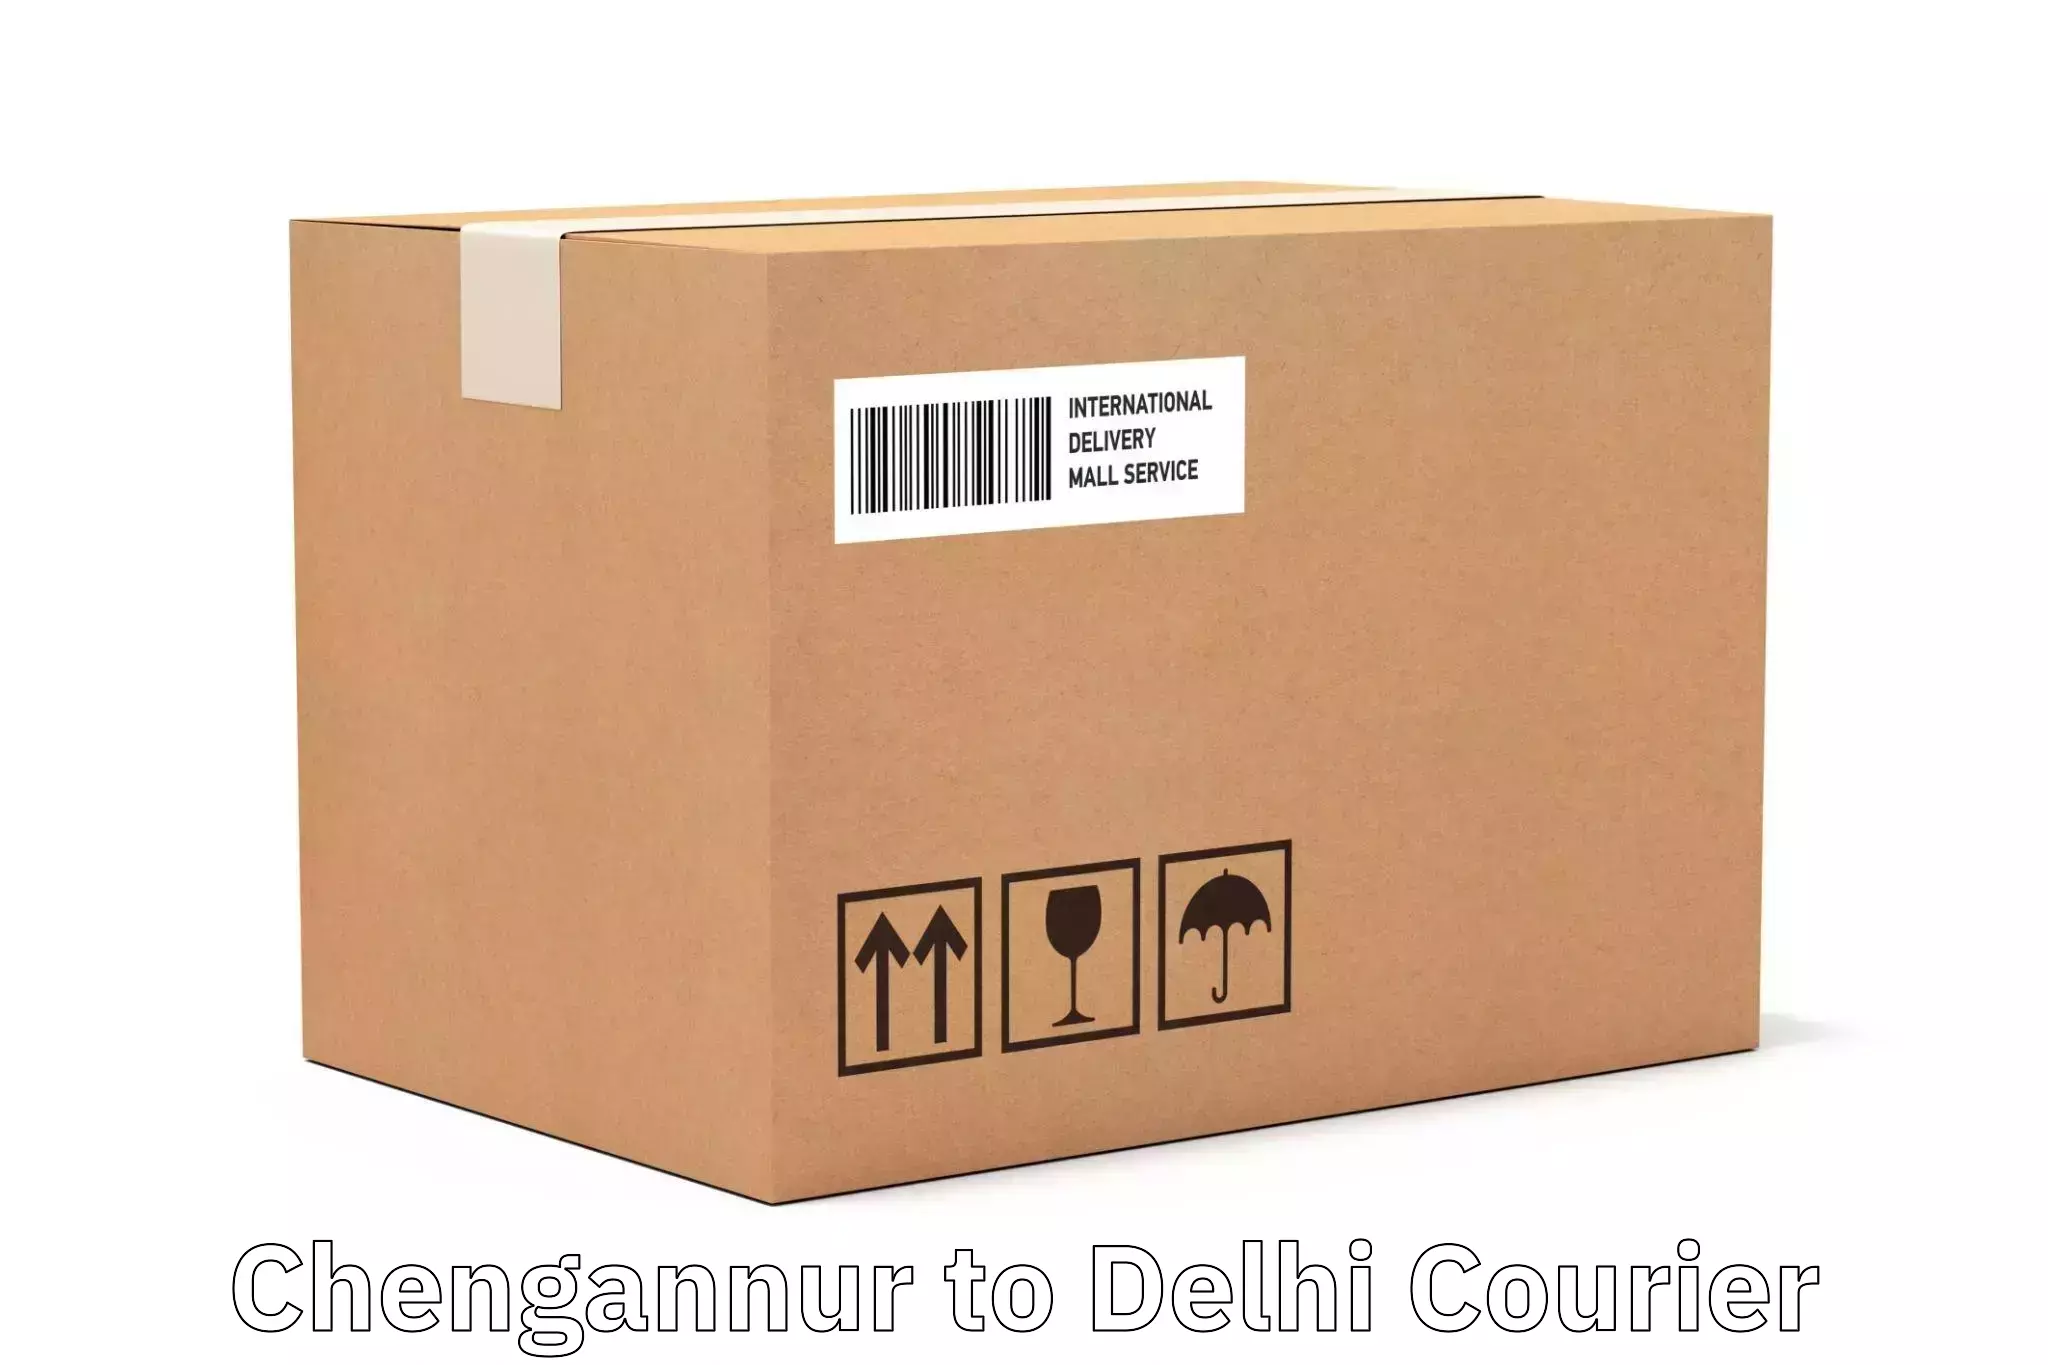 Express package delivery Chengannur to Lodhi Road